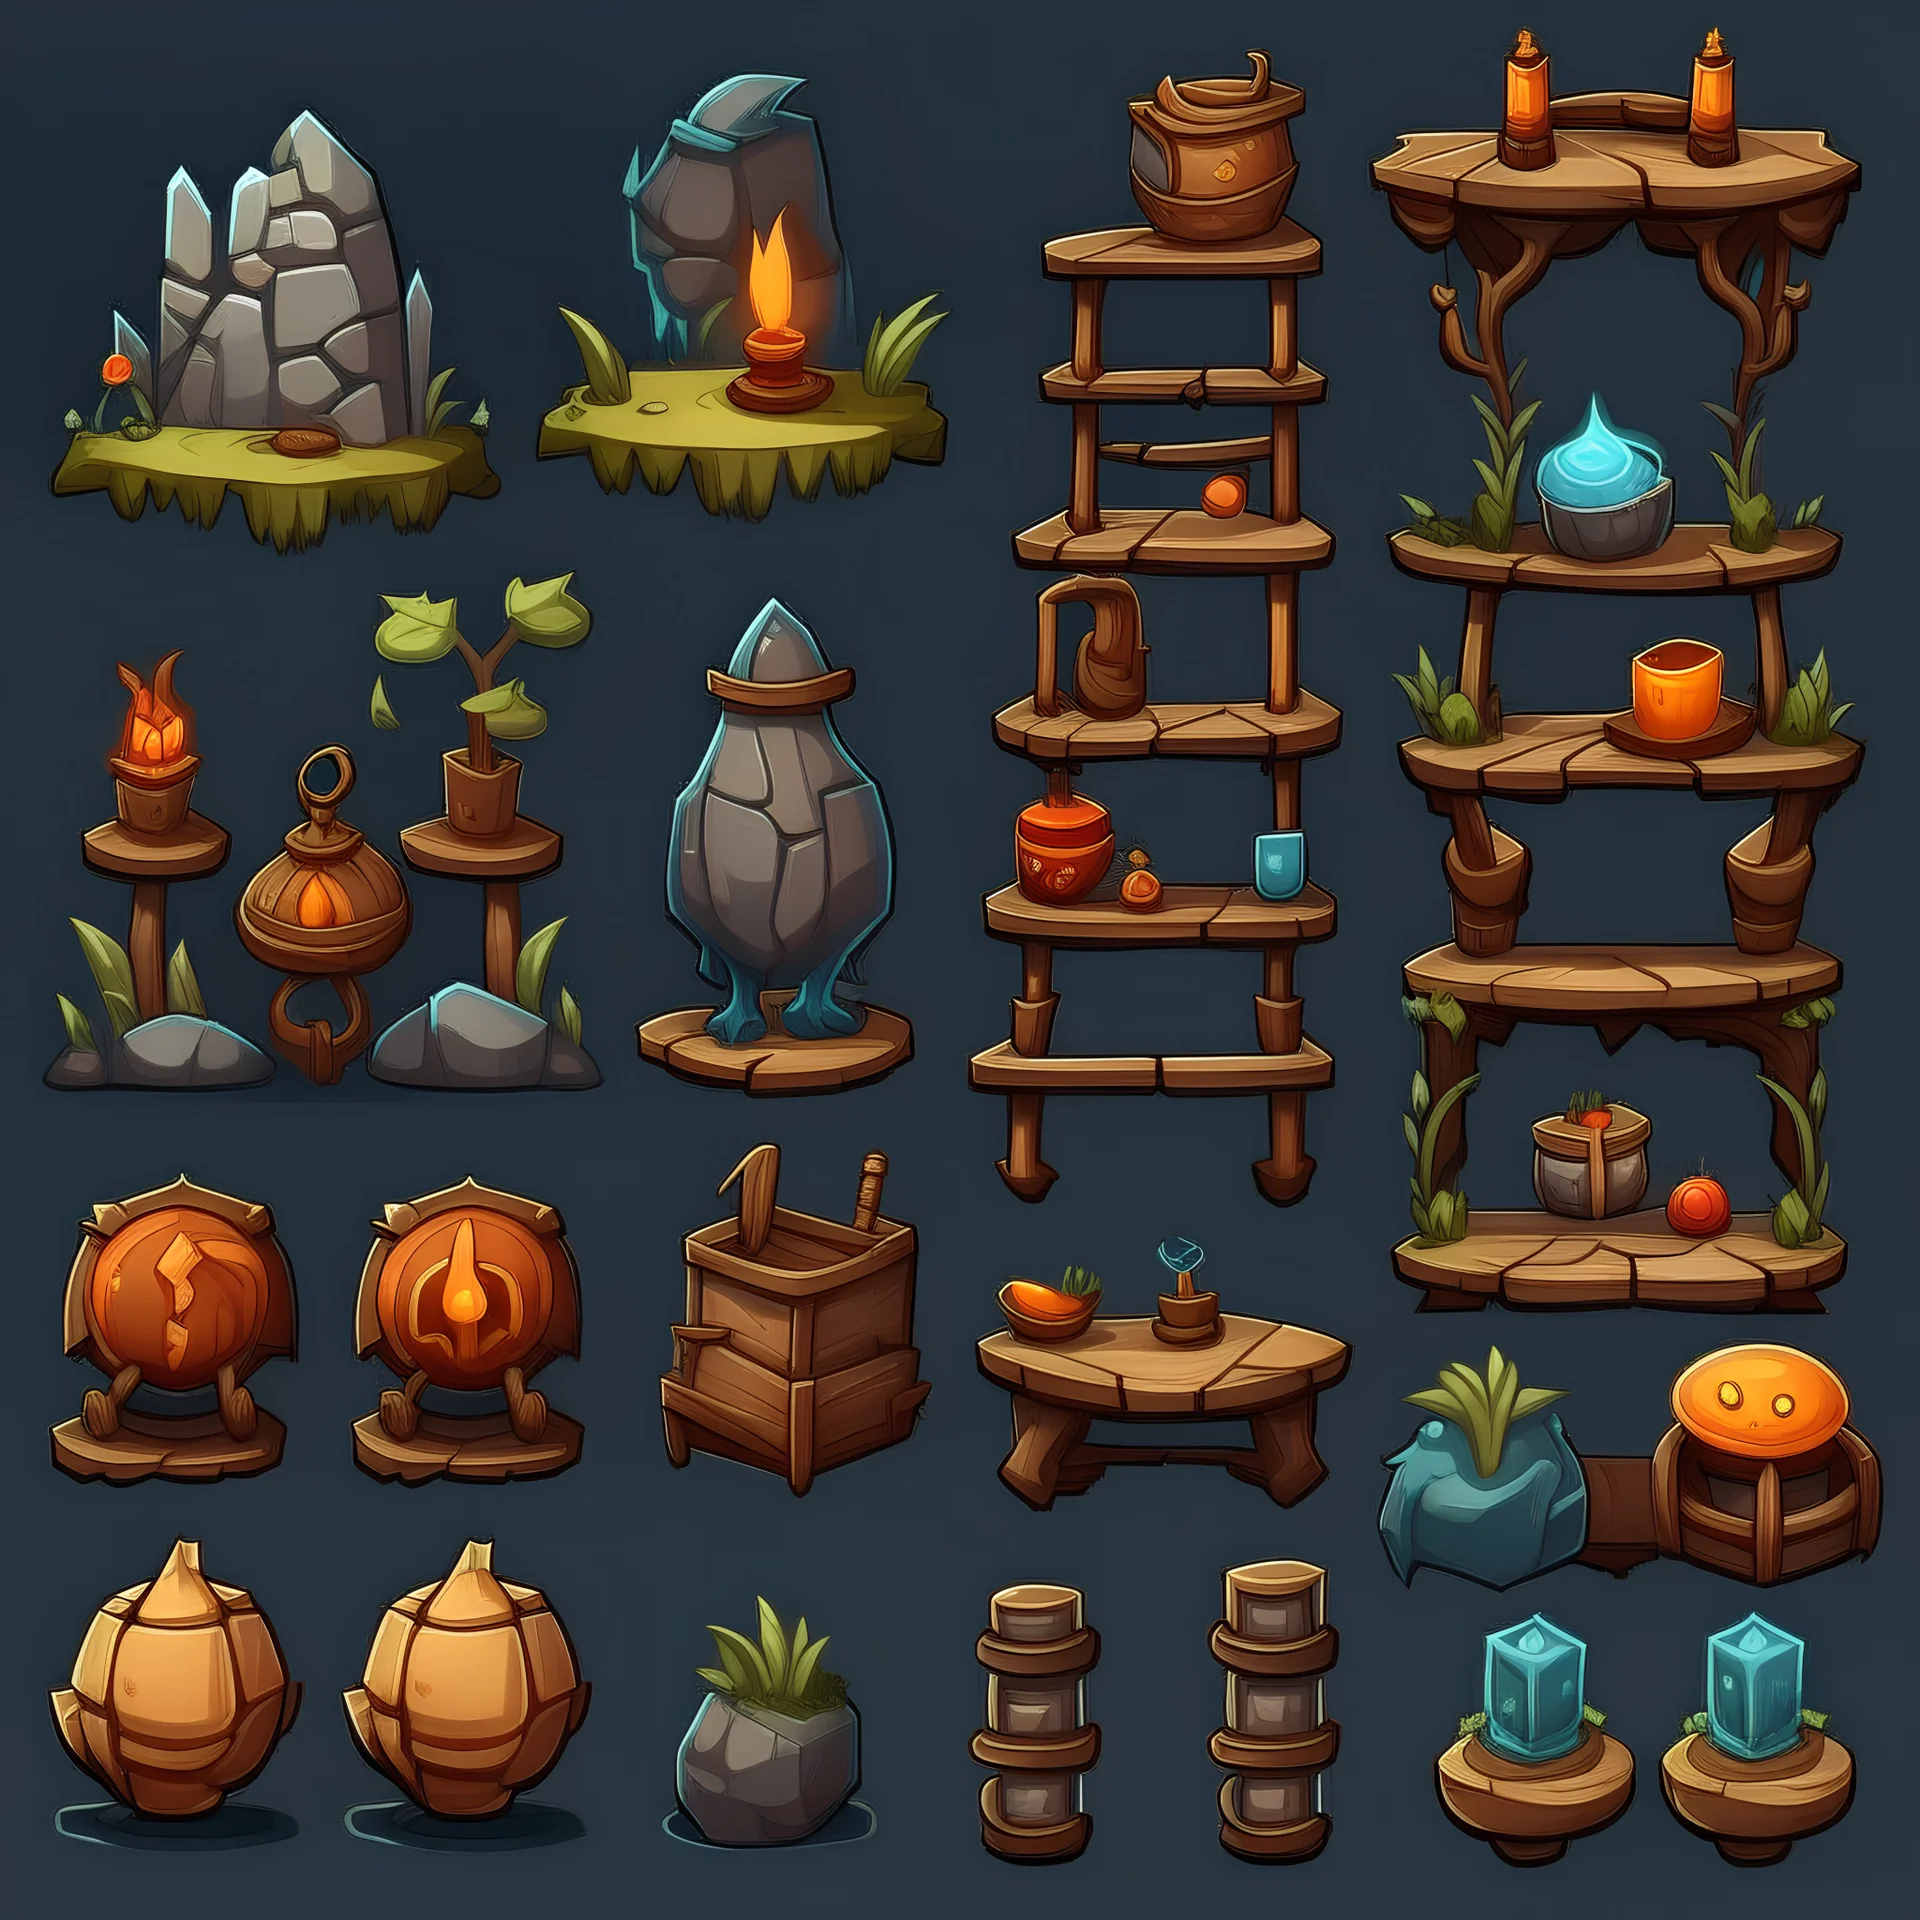 2d game art assets inspired by (inside) game